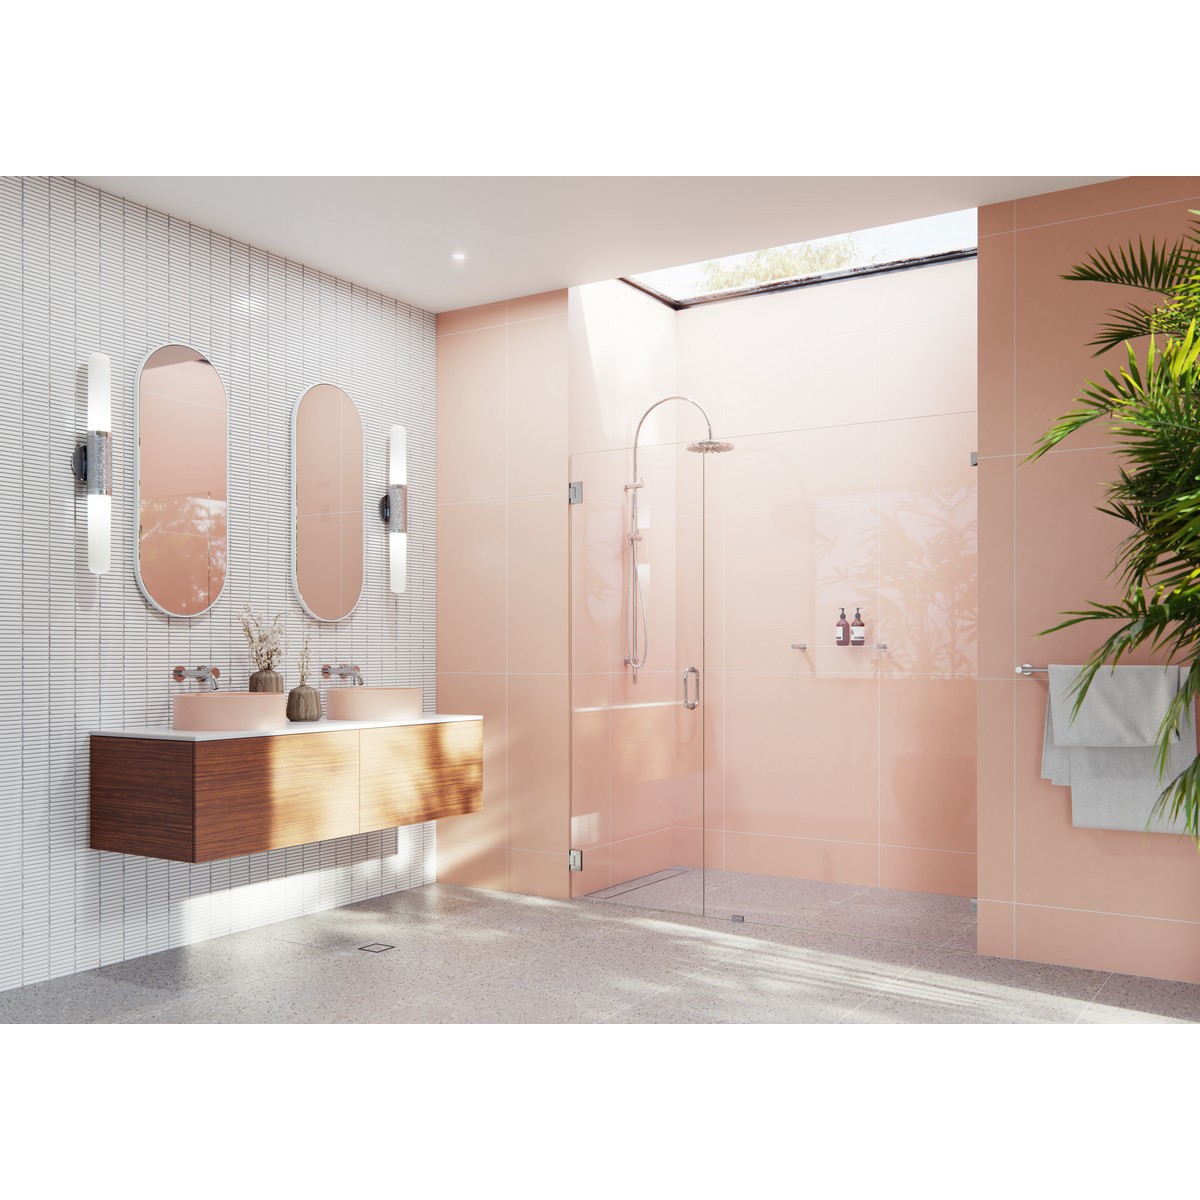 GLASS WAREHOUSE GW-WH-65.75 ILLUME 65 3/4 W X 78 H WALL HINGED FULLY FRAMELESS GLASS SHOWER ENCLOSURE